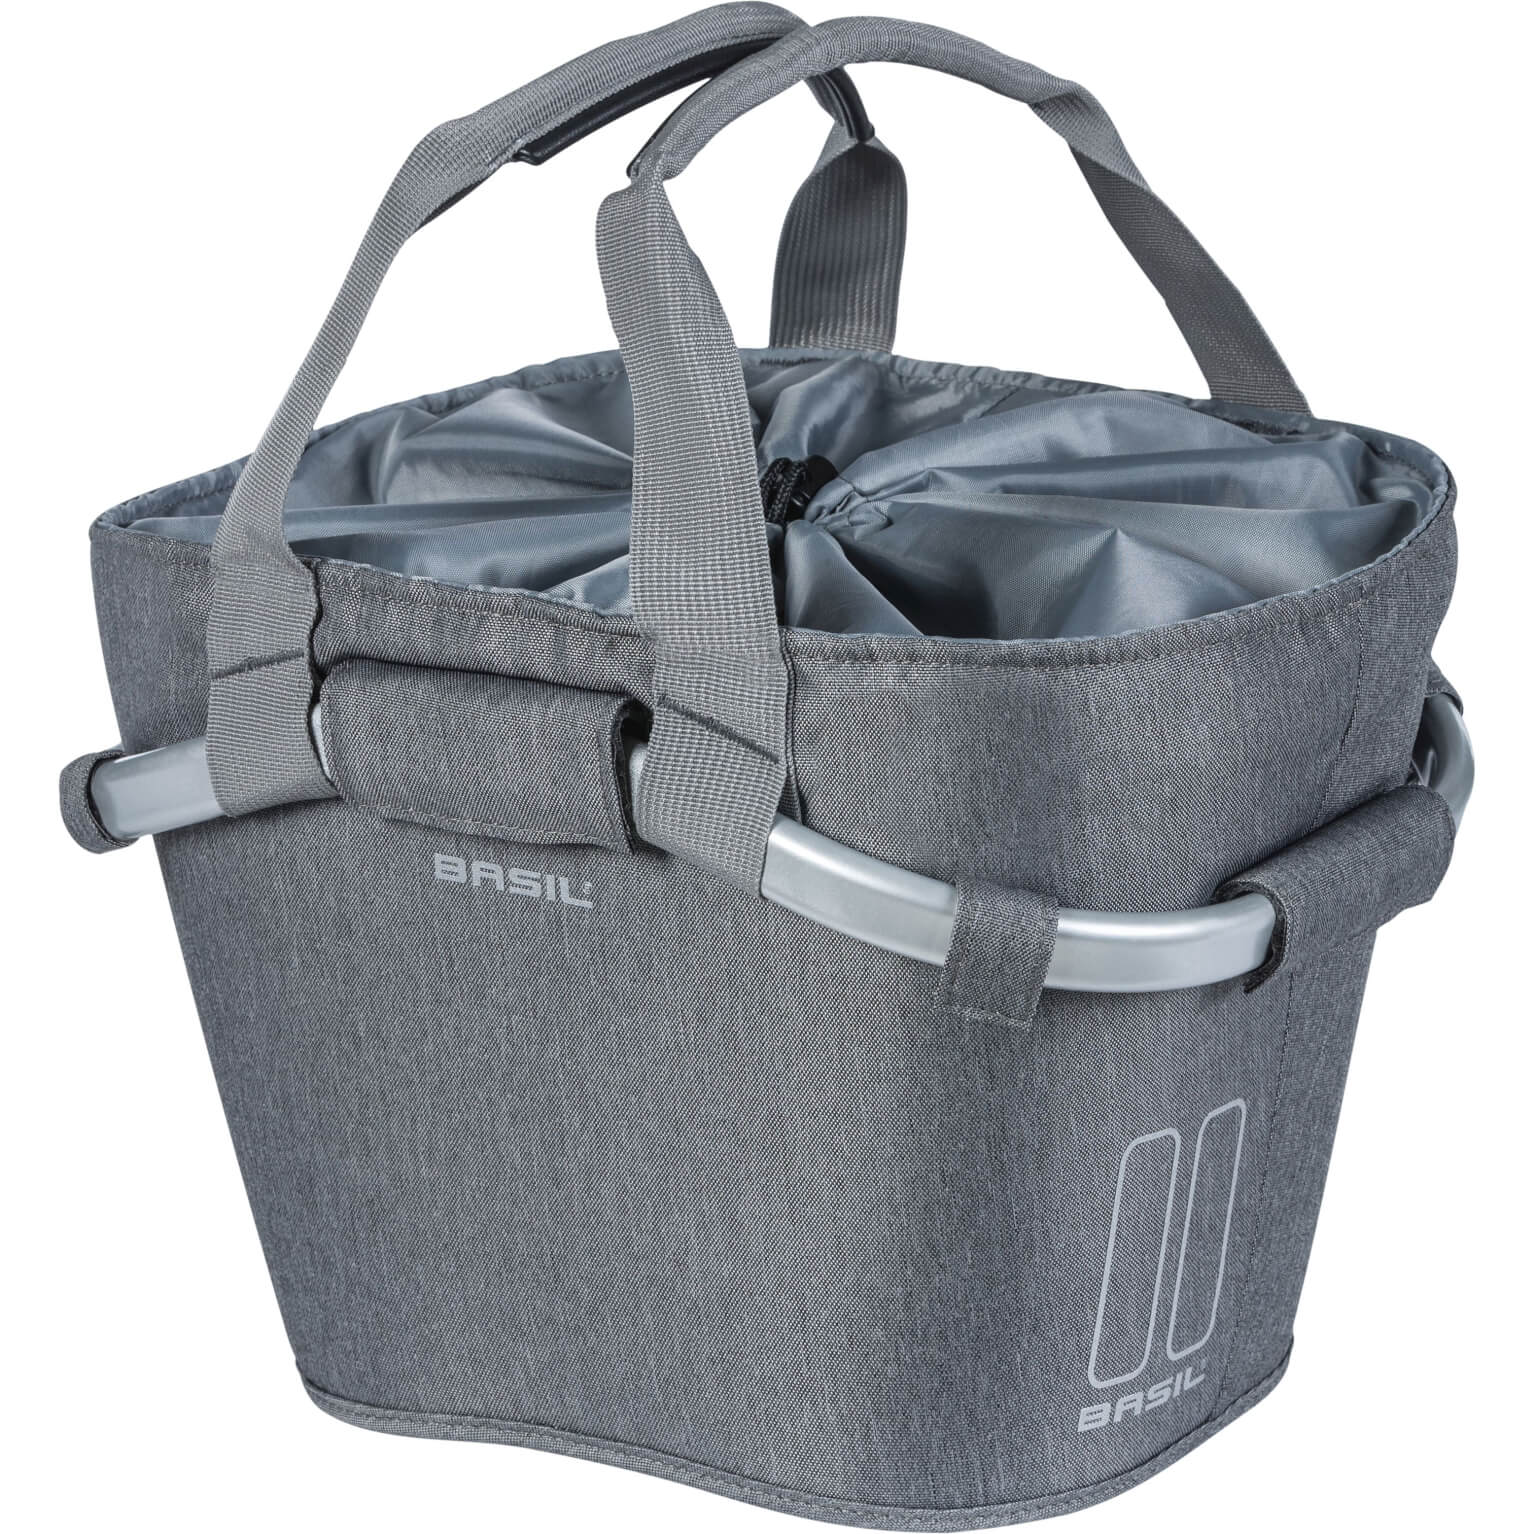 Basil mand front 2day KF 15L grey melee 37x27x25cm